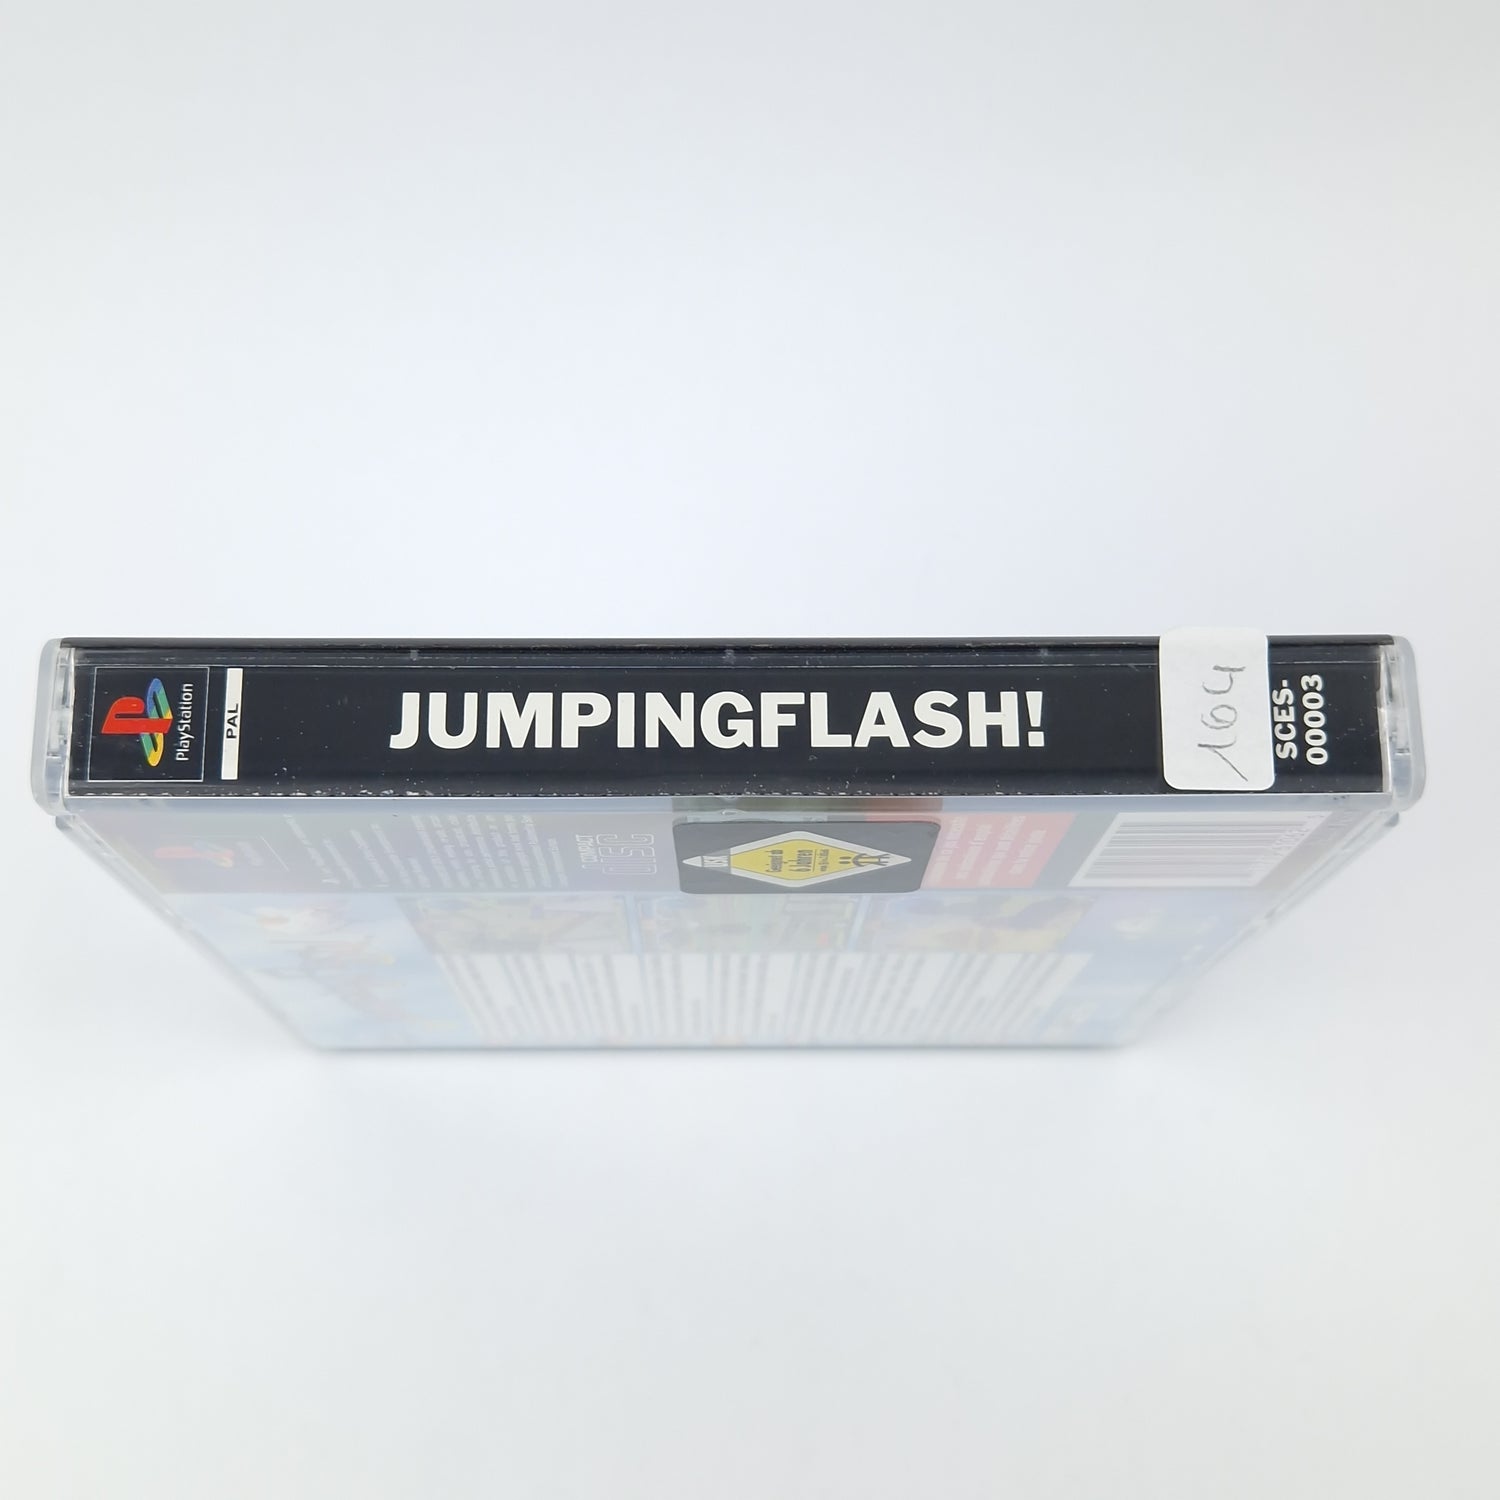 Playstation 1 game: Jumping Flash! - CD instructions OVP SONY PS1 PSX PAL